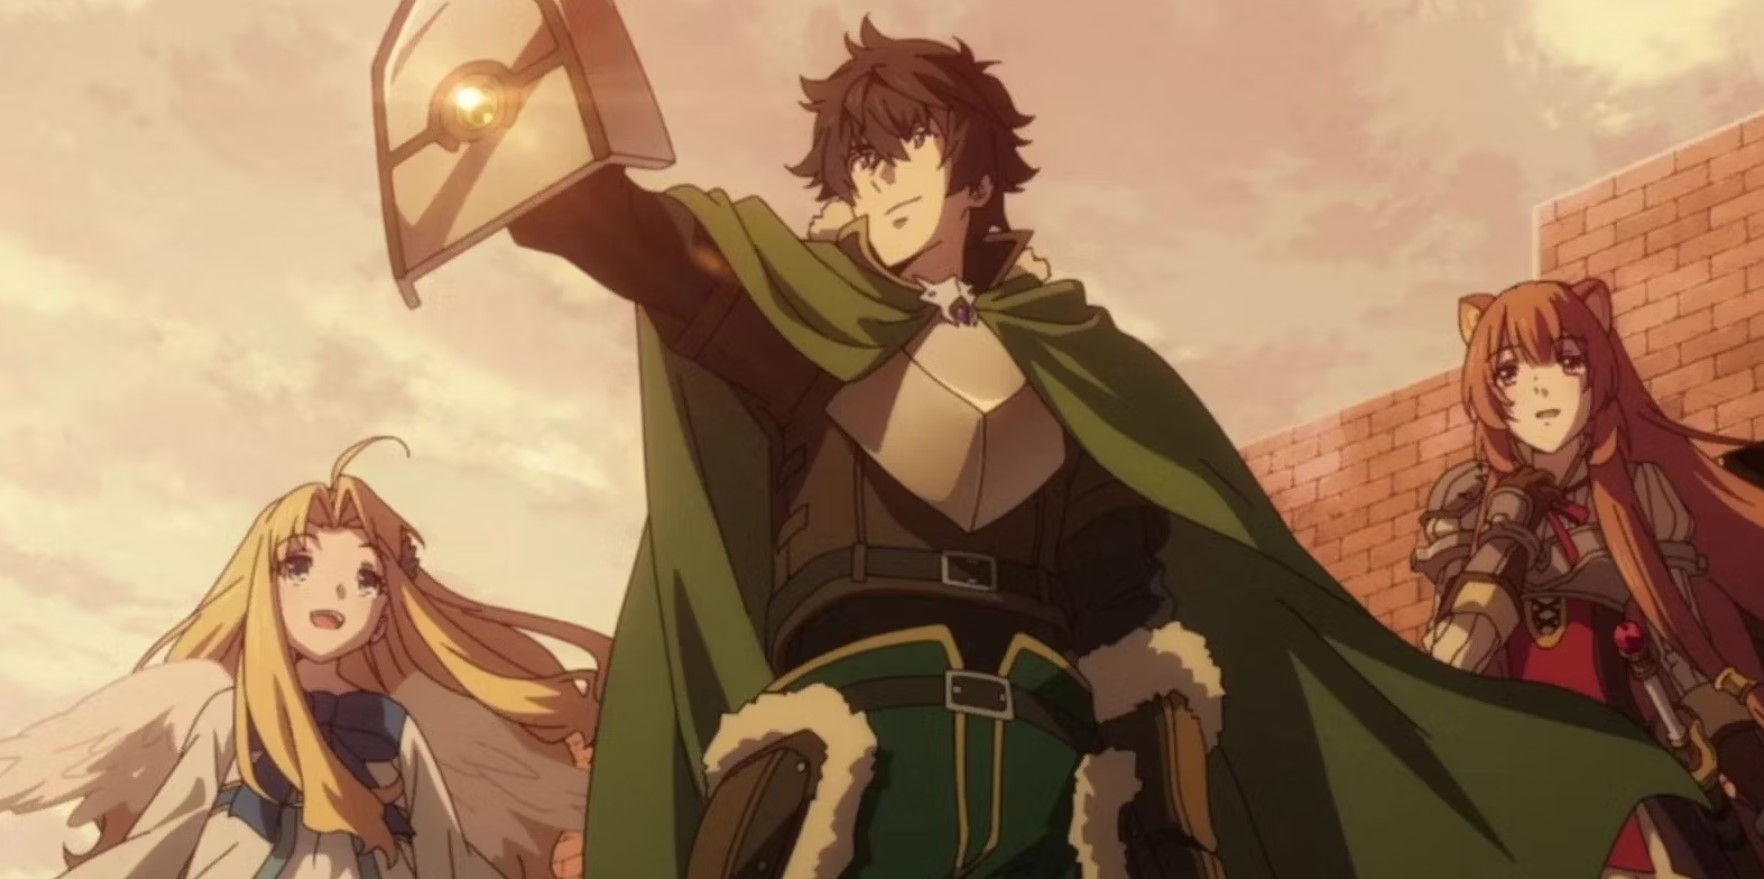 When will The Rising of the Shield Hero Season 3 Episode 5 be on Crunchyroll ?